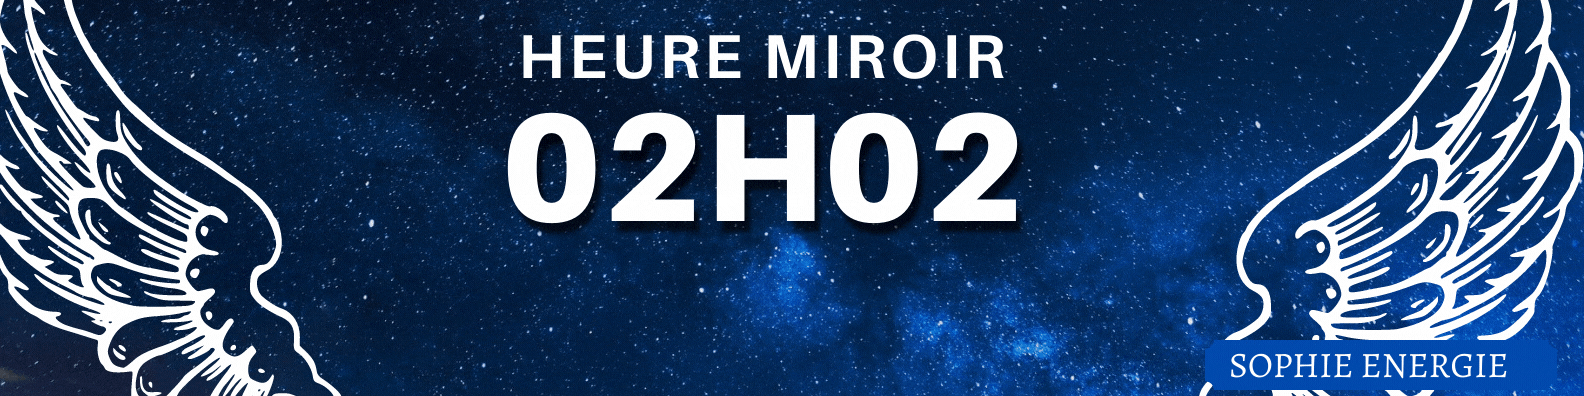 HEURE MIROIR anges 02h02